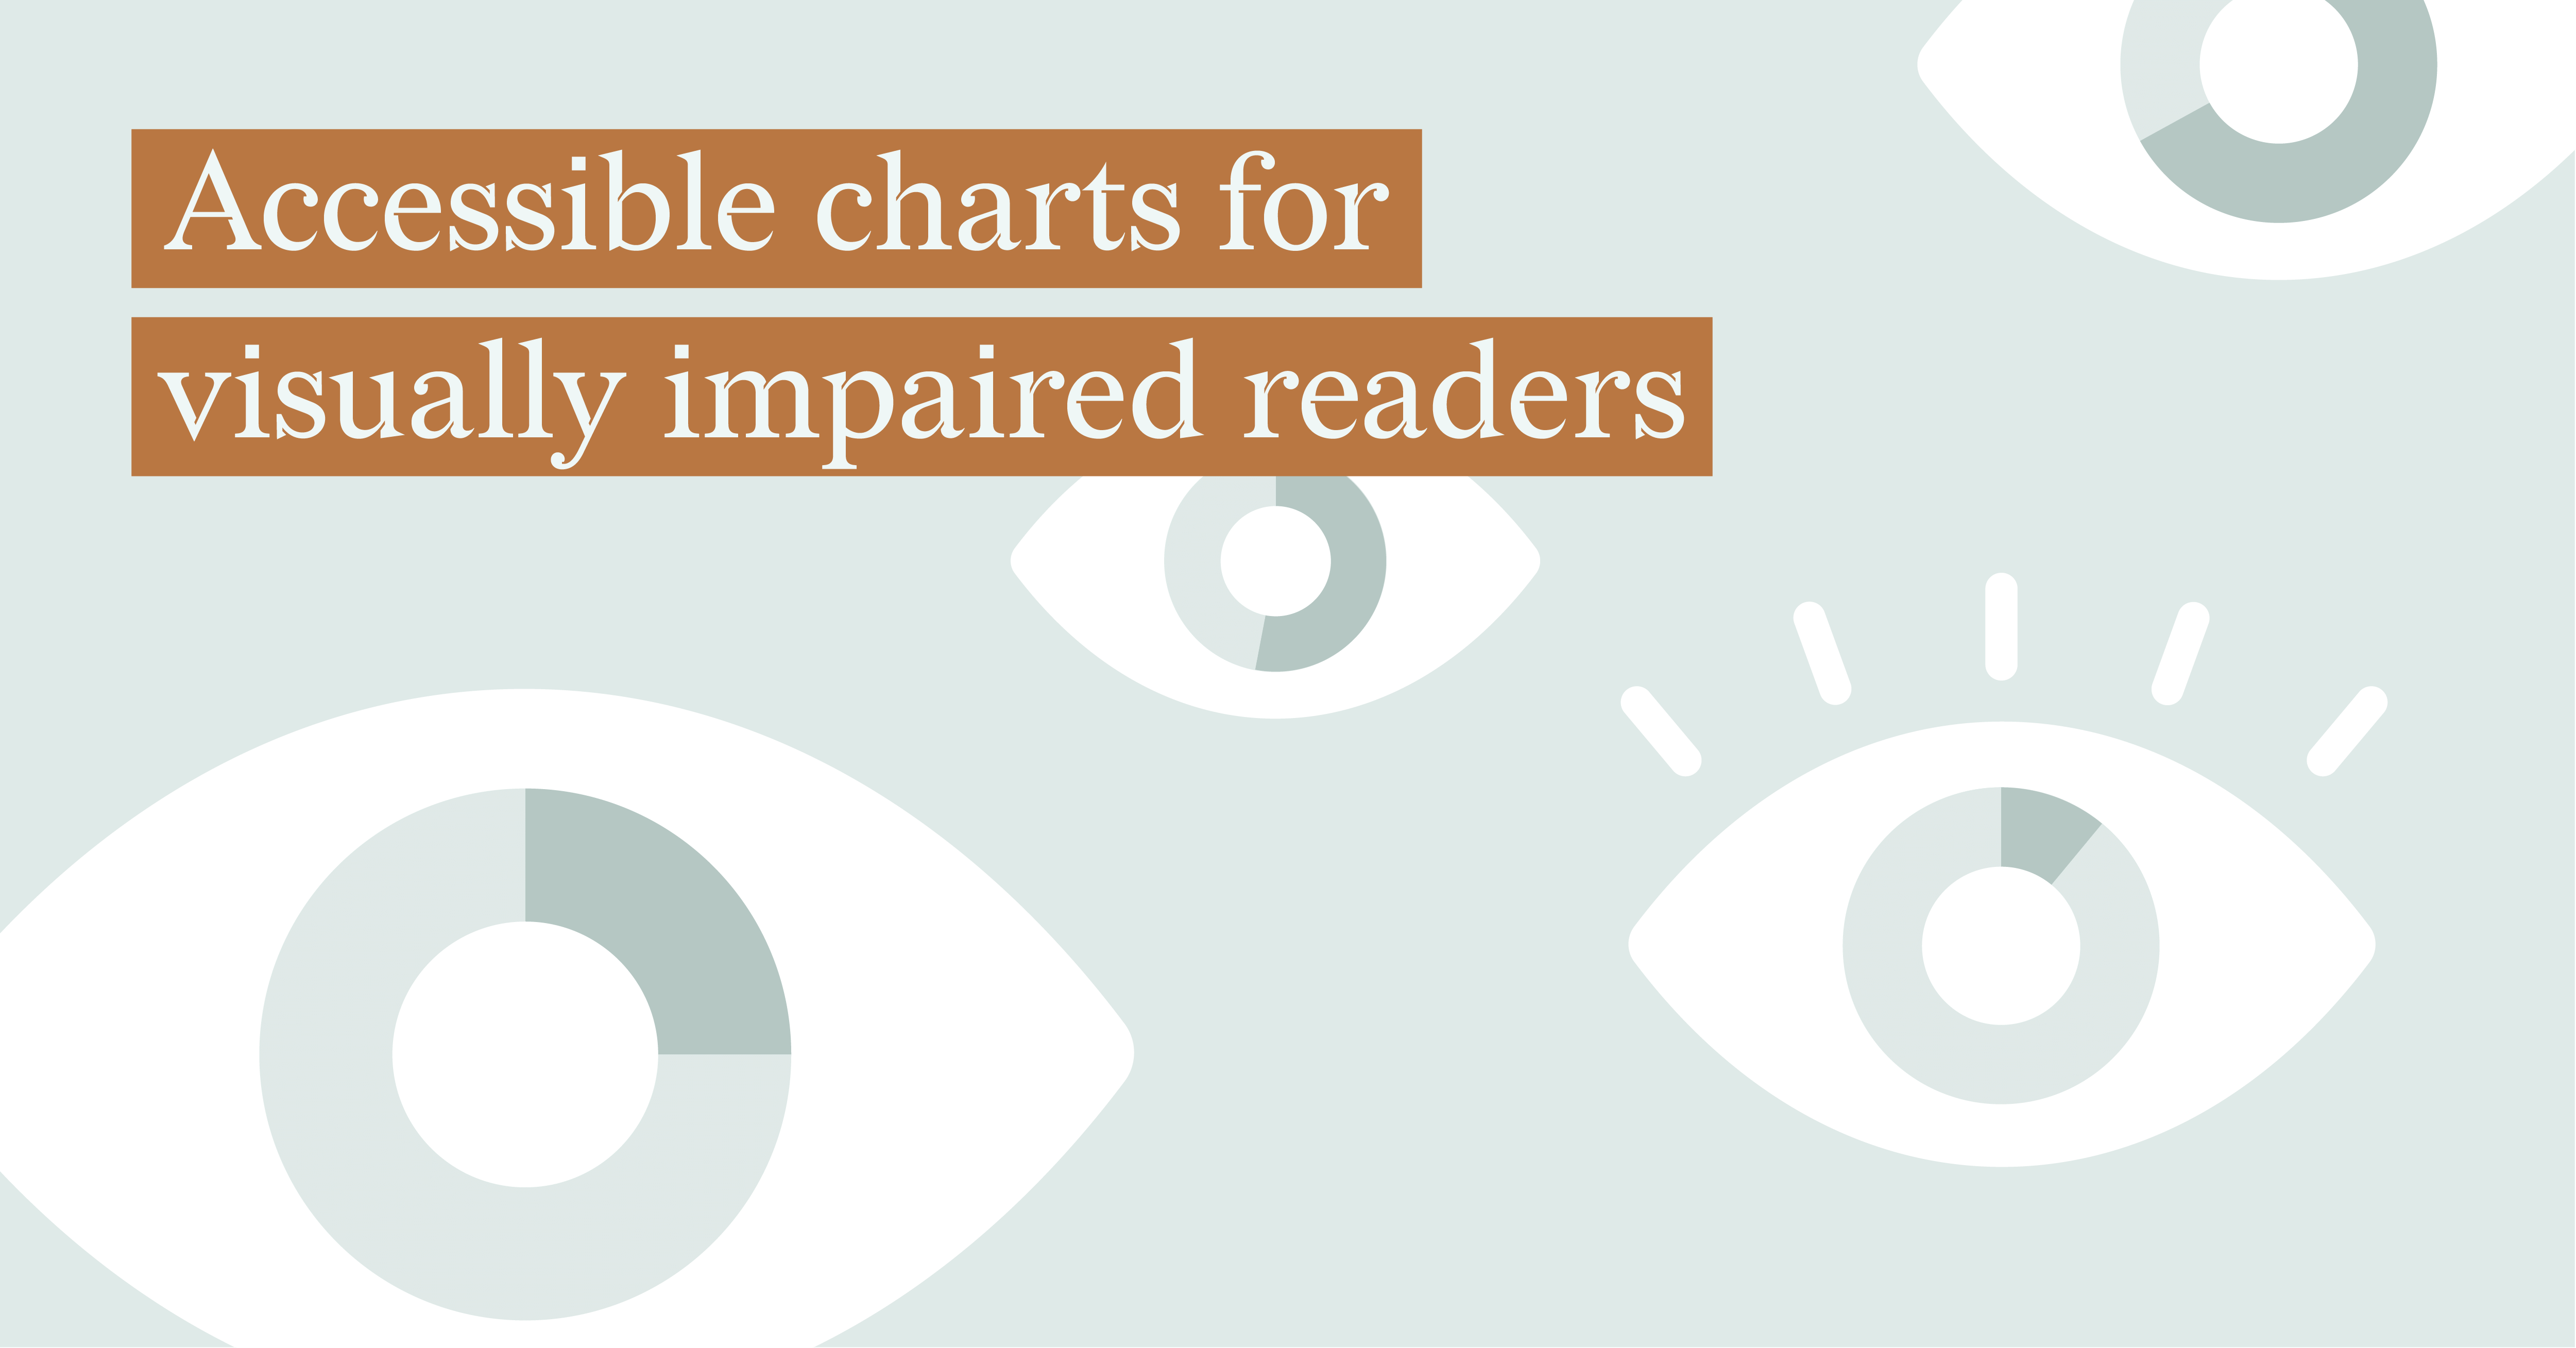 Light green background with four white icons representing eyes and the article's title that reads "Accessible charts for visually impaired readers" with a brown background behind the letters.